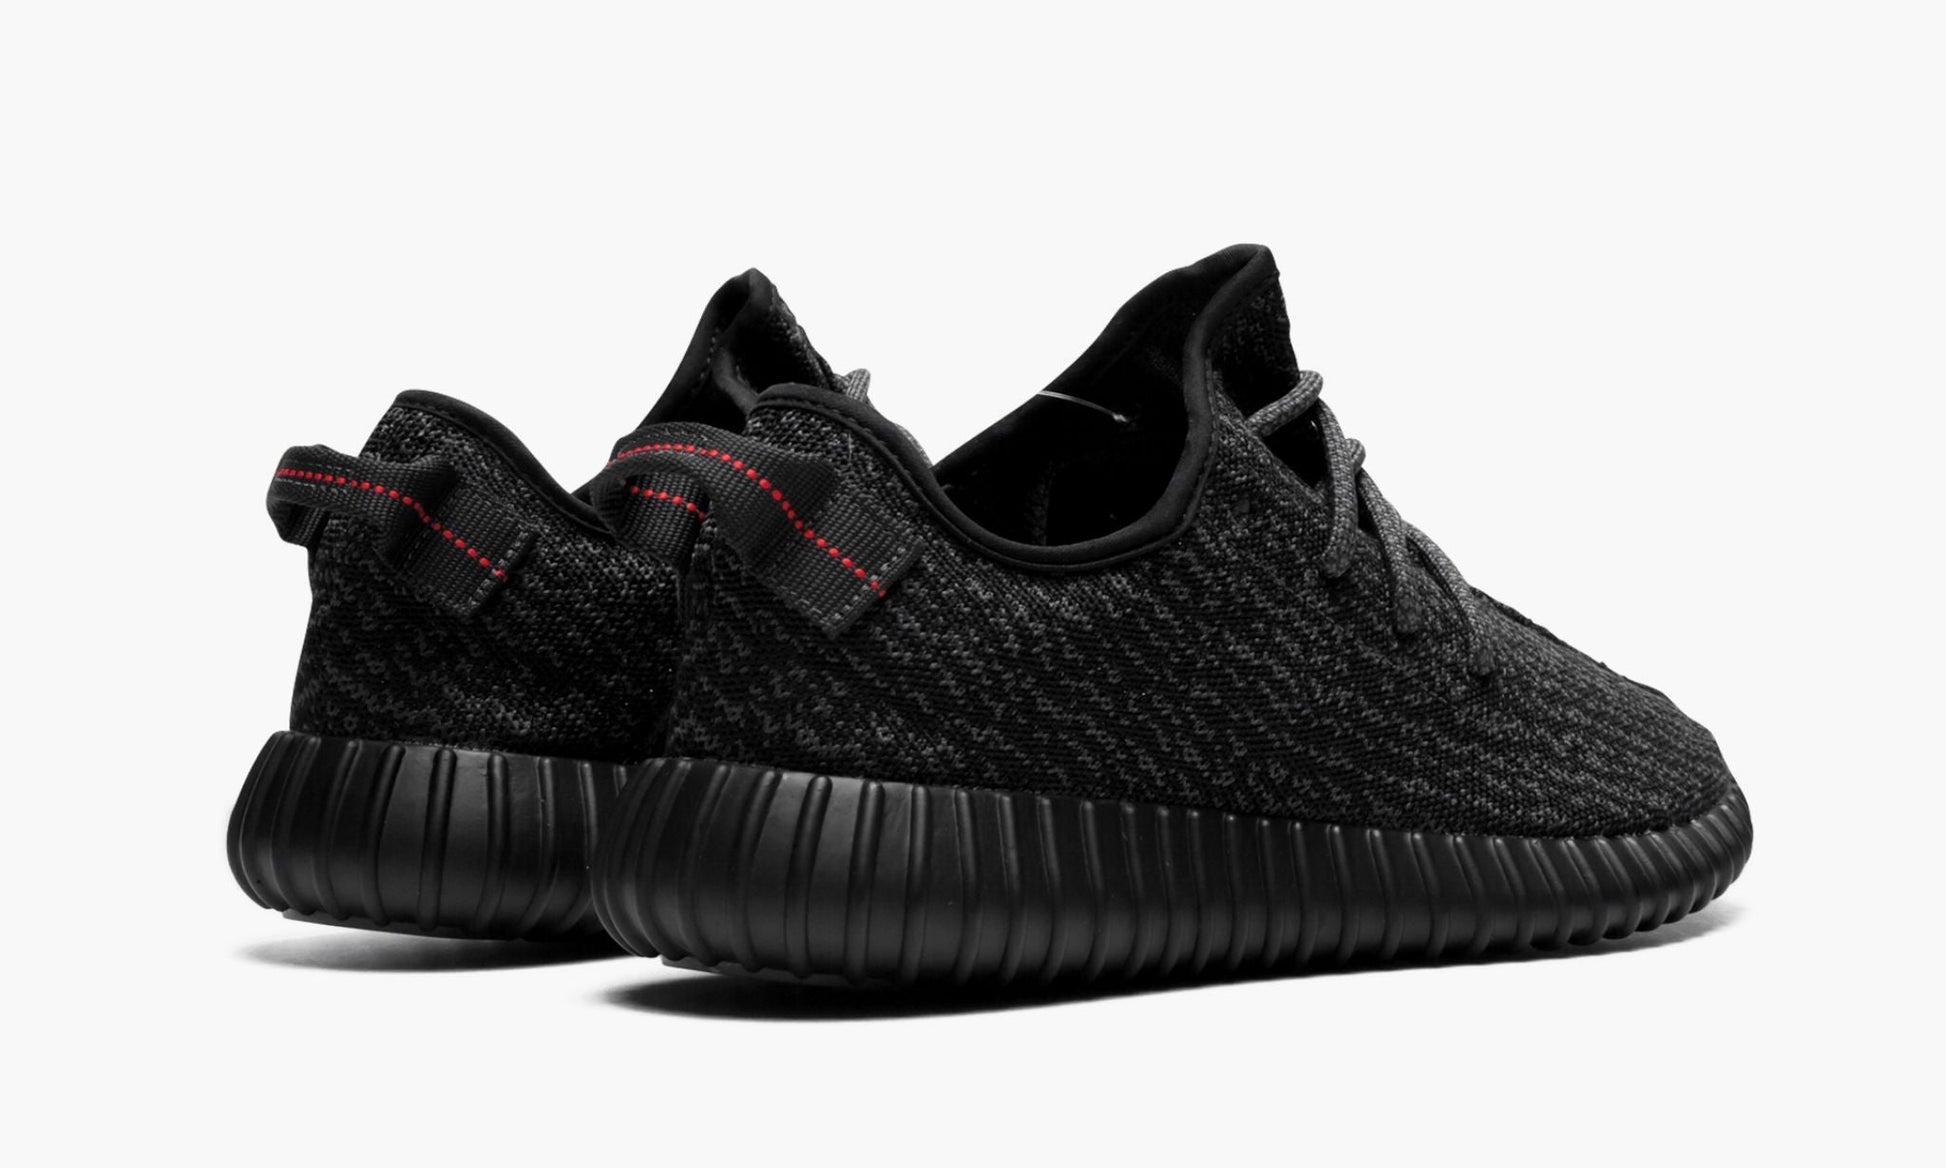 Yeezy Boost 350 "Pirate Black - 2016 Release"